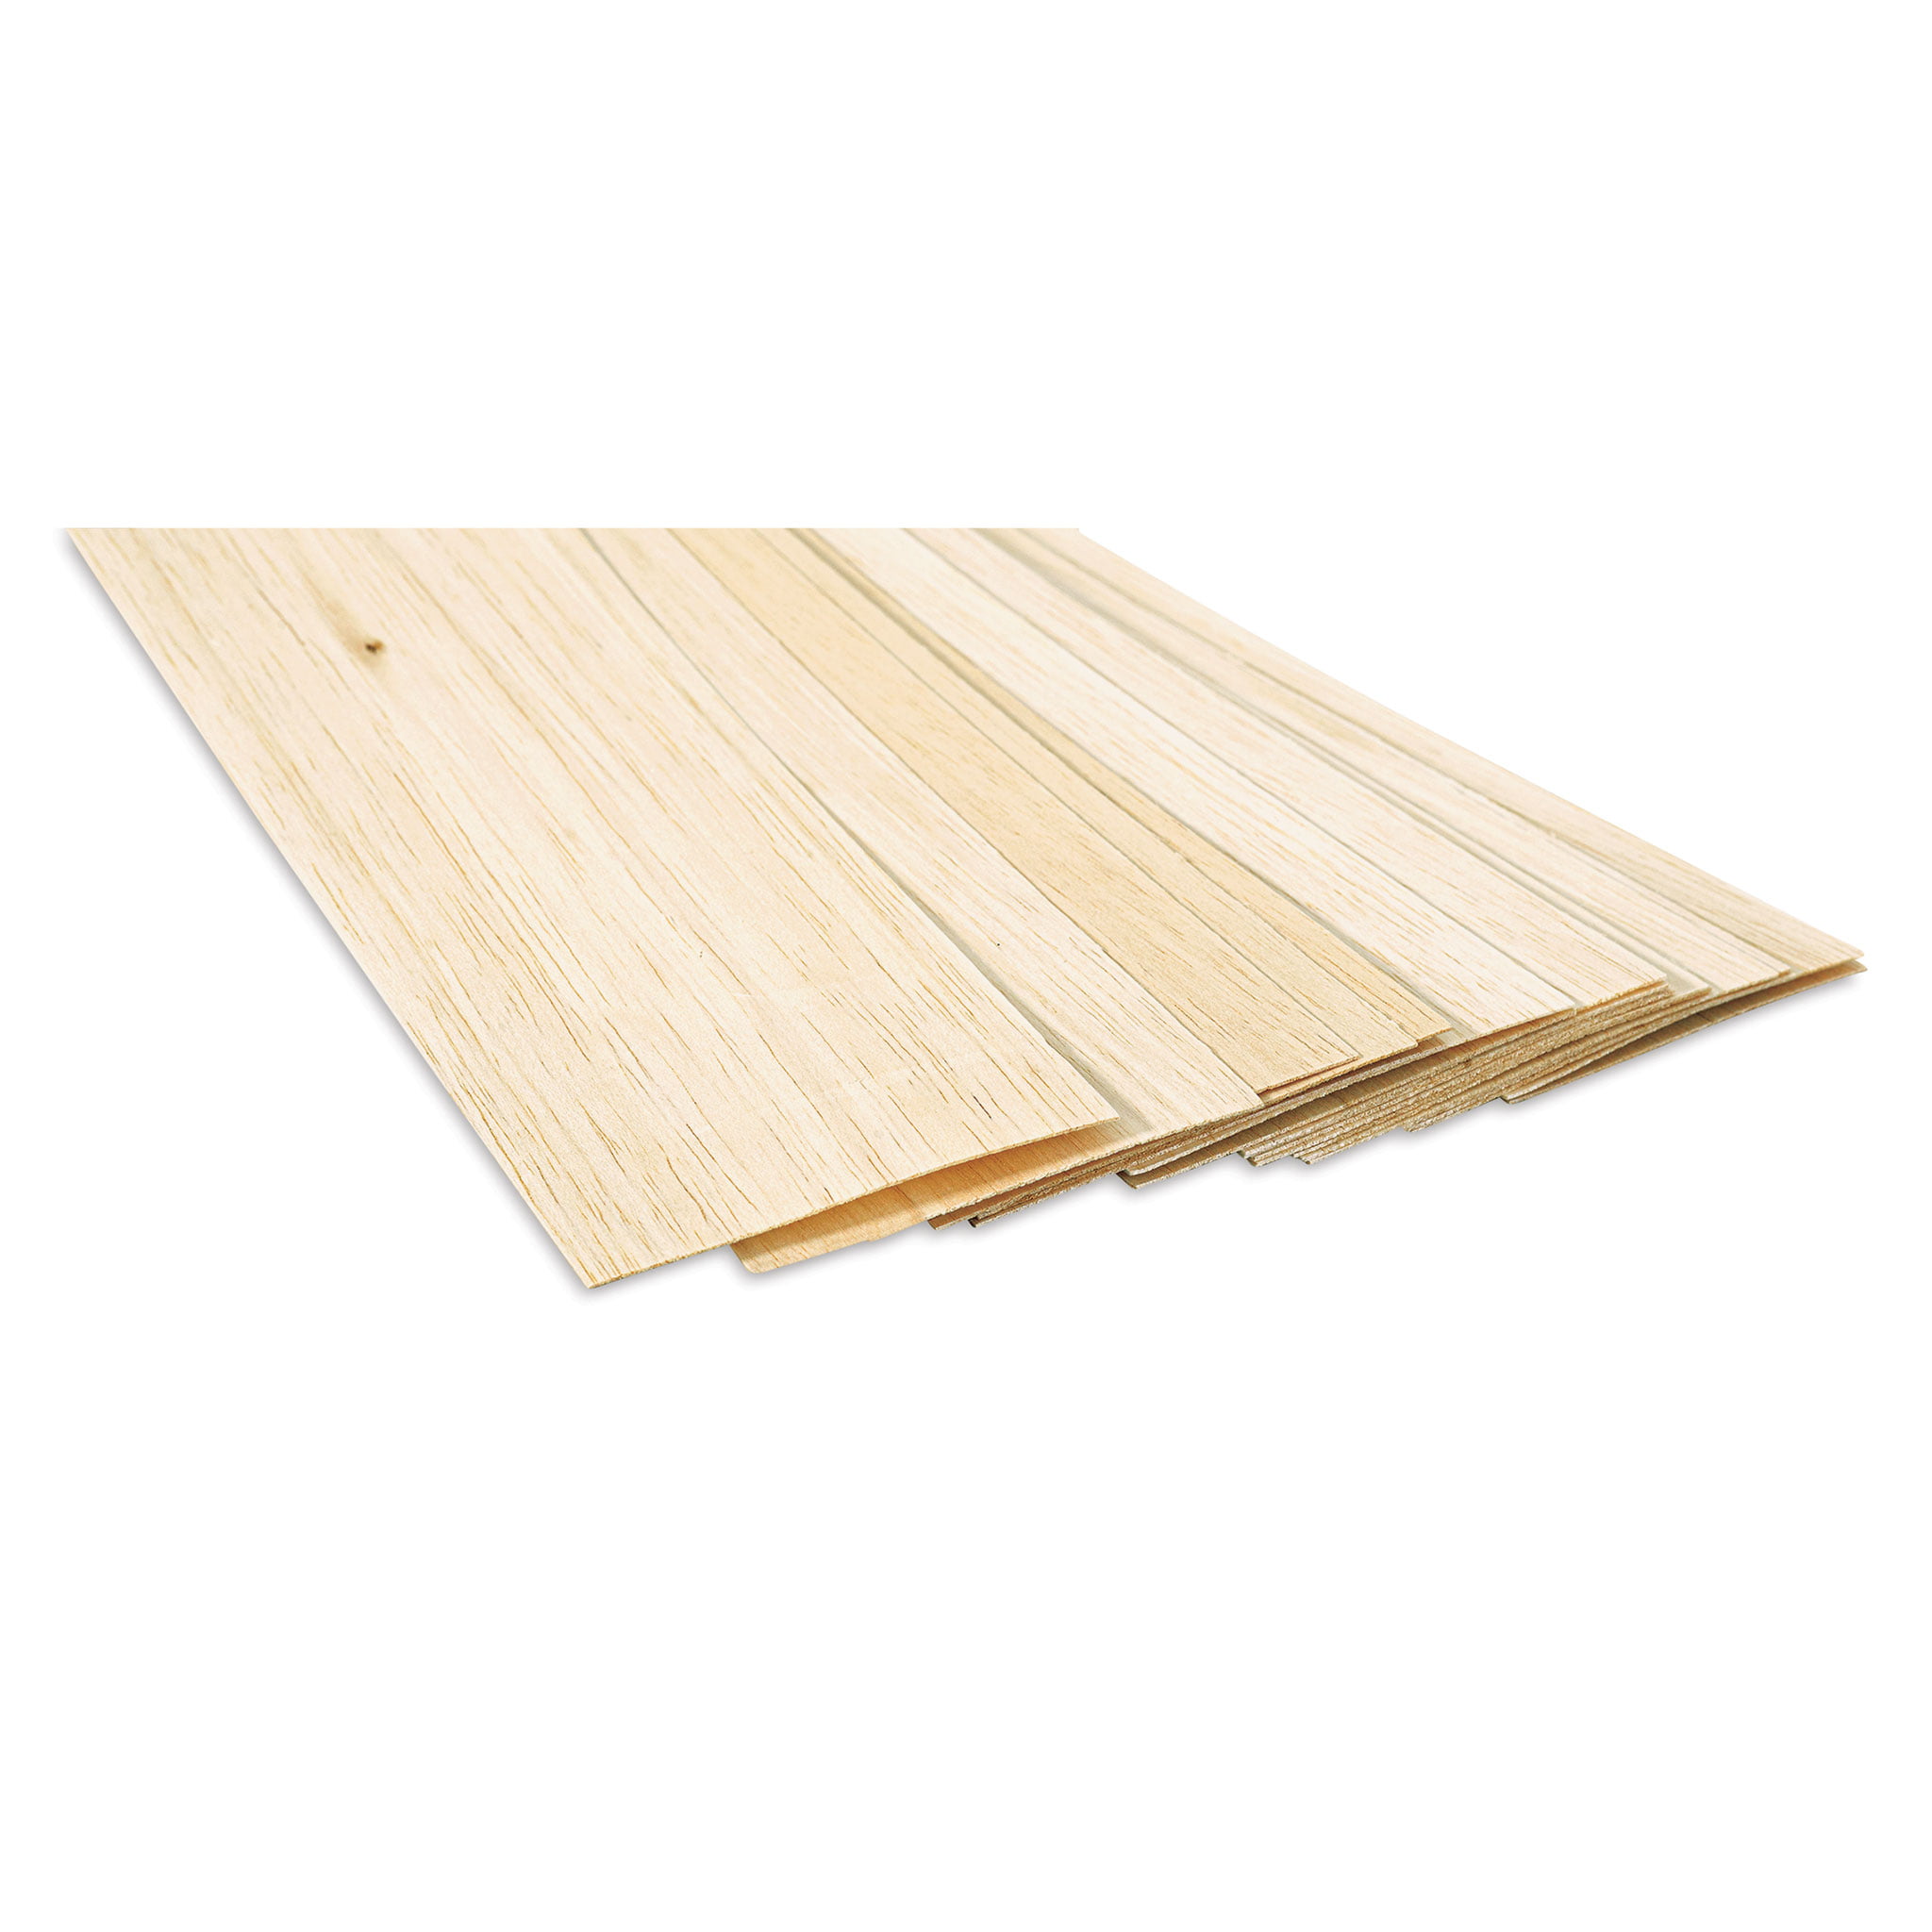 Oasis Flat Balsa, Natural, 1-in Wide x 31.5-in Length, 24 Pieces Per Pack  at